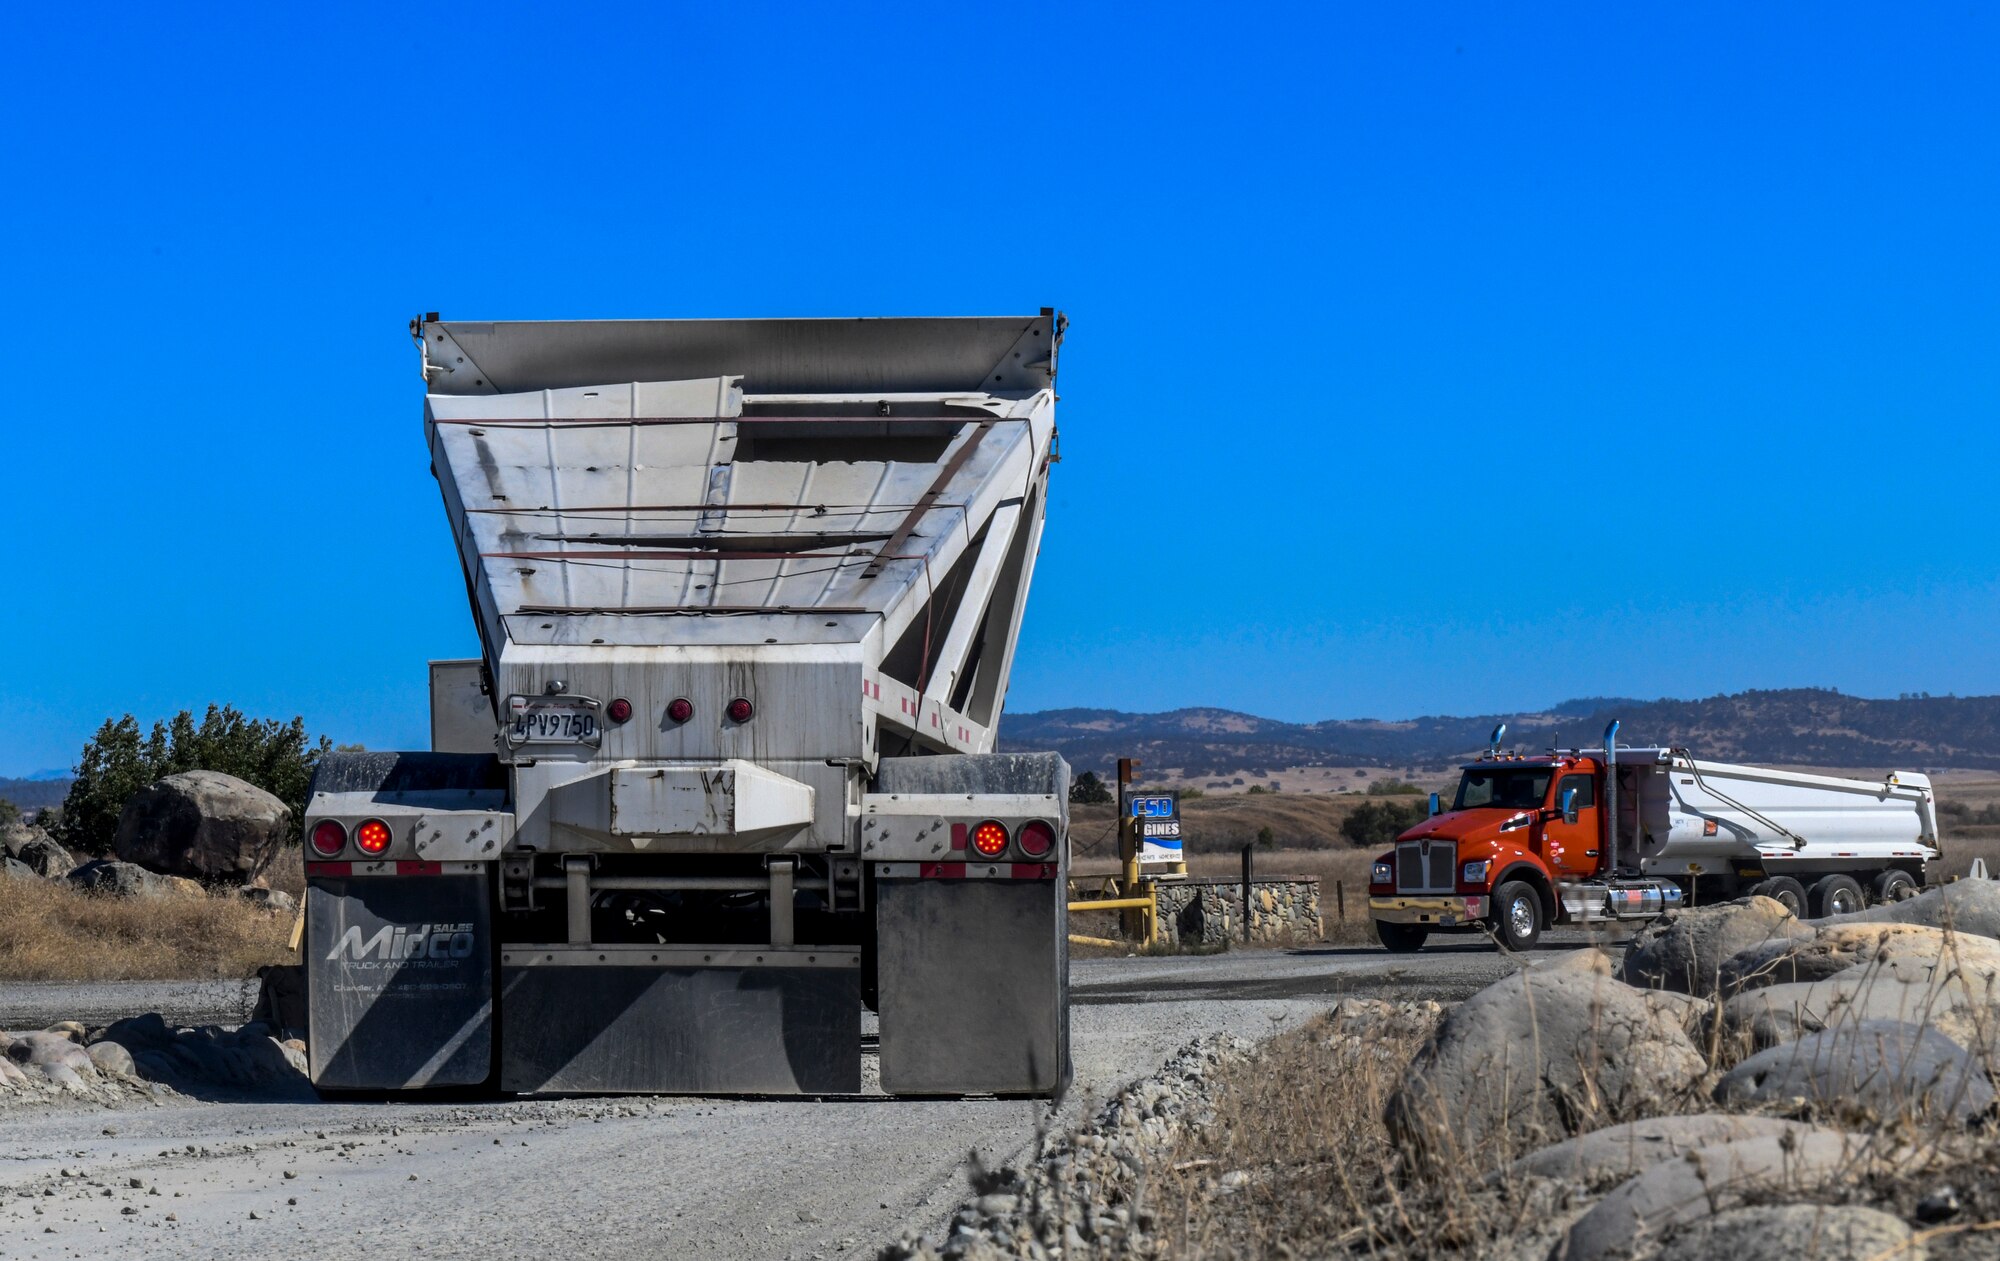 A contracted truck drives off after being weighed in Marysville, California, Oct. 10, 2019. There are some indicators that can be used to identify a truck but the license tags are not good indicators to use because the trailer gets switched multiple times to different trucks. (U.S. Air Force Photo by Senior Airman Colville McFee)